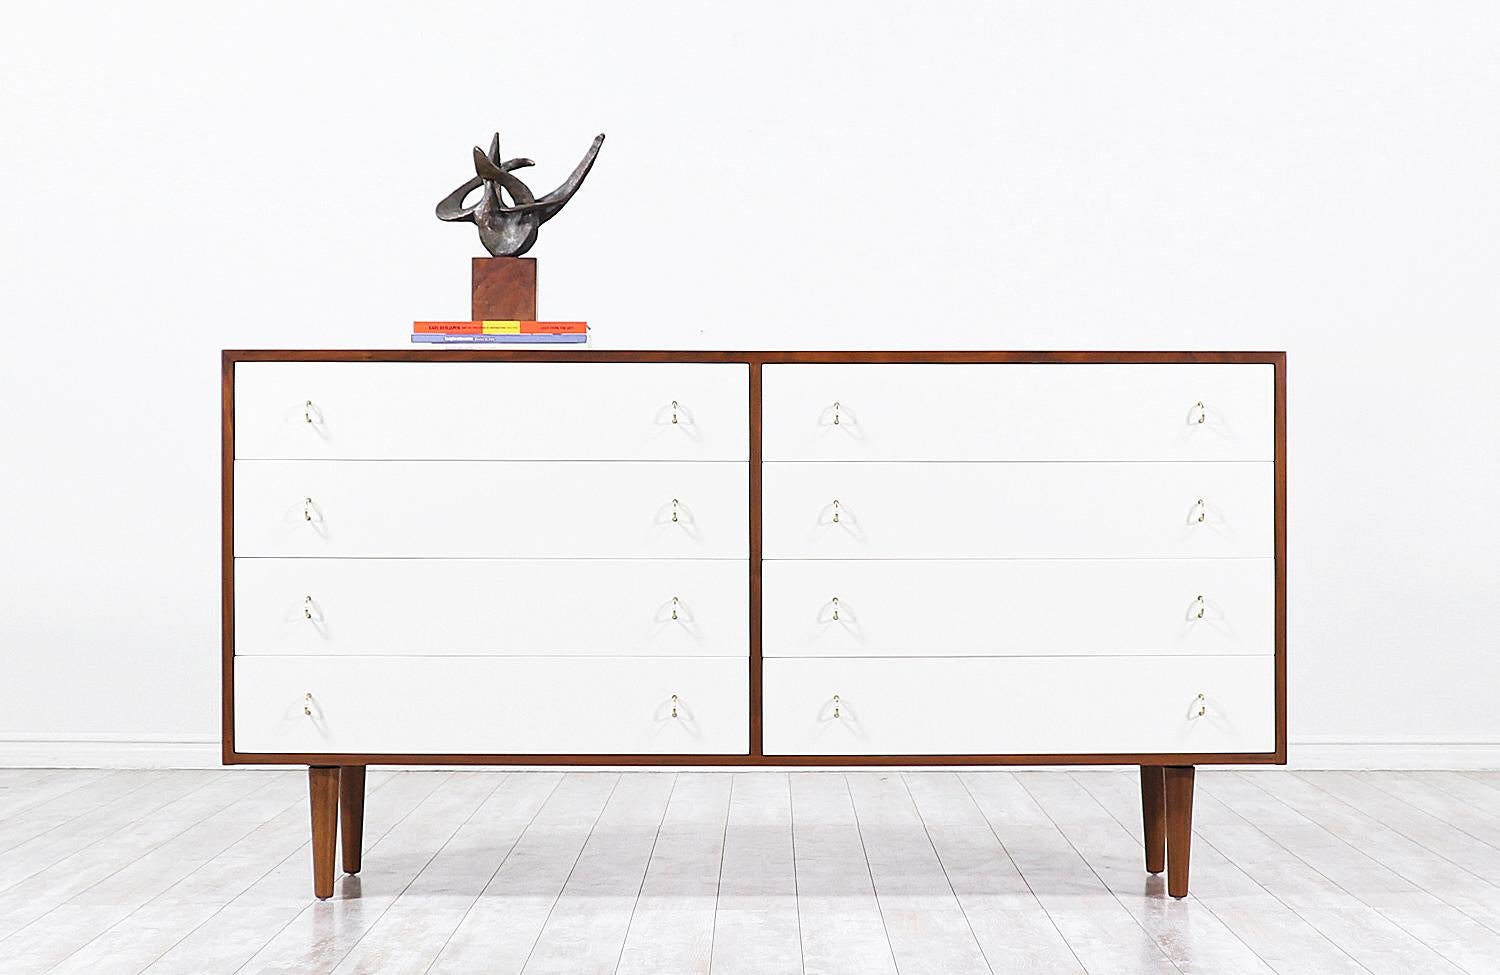 Elegant Mid-Century Modern two-tone dresser designed by Milo Baughman for Glenn of California in the United States circa 1950s. This spectacular eight-drawer dresser features a sturdy walnut wood case with a custom high-polished ivory lacquered